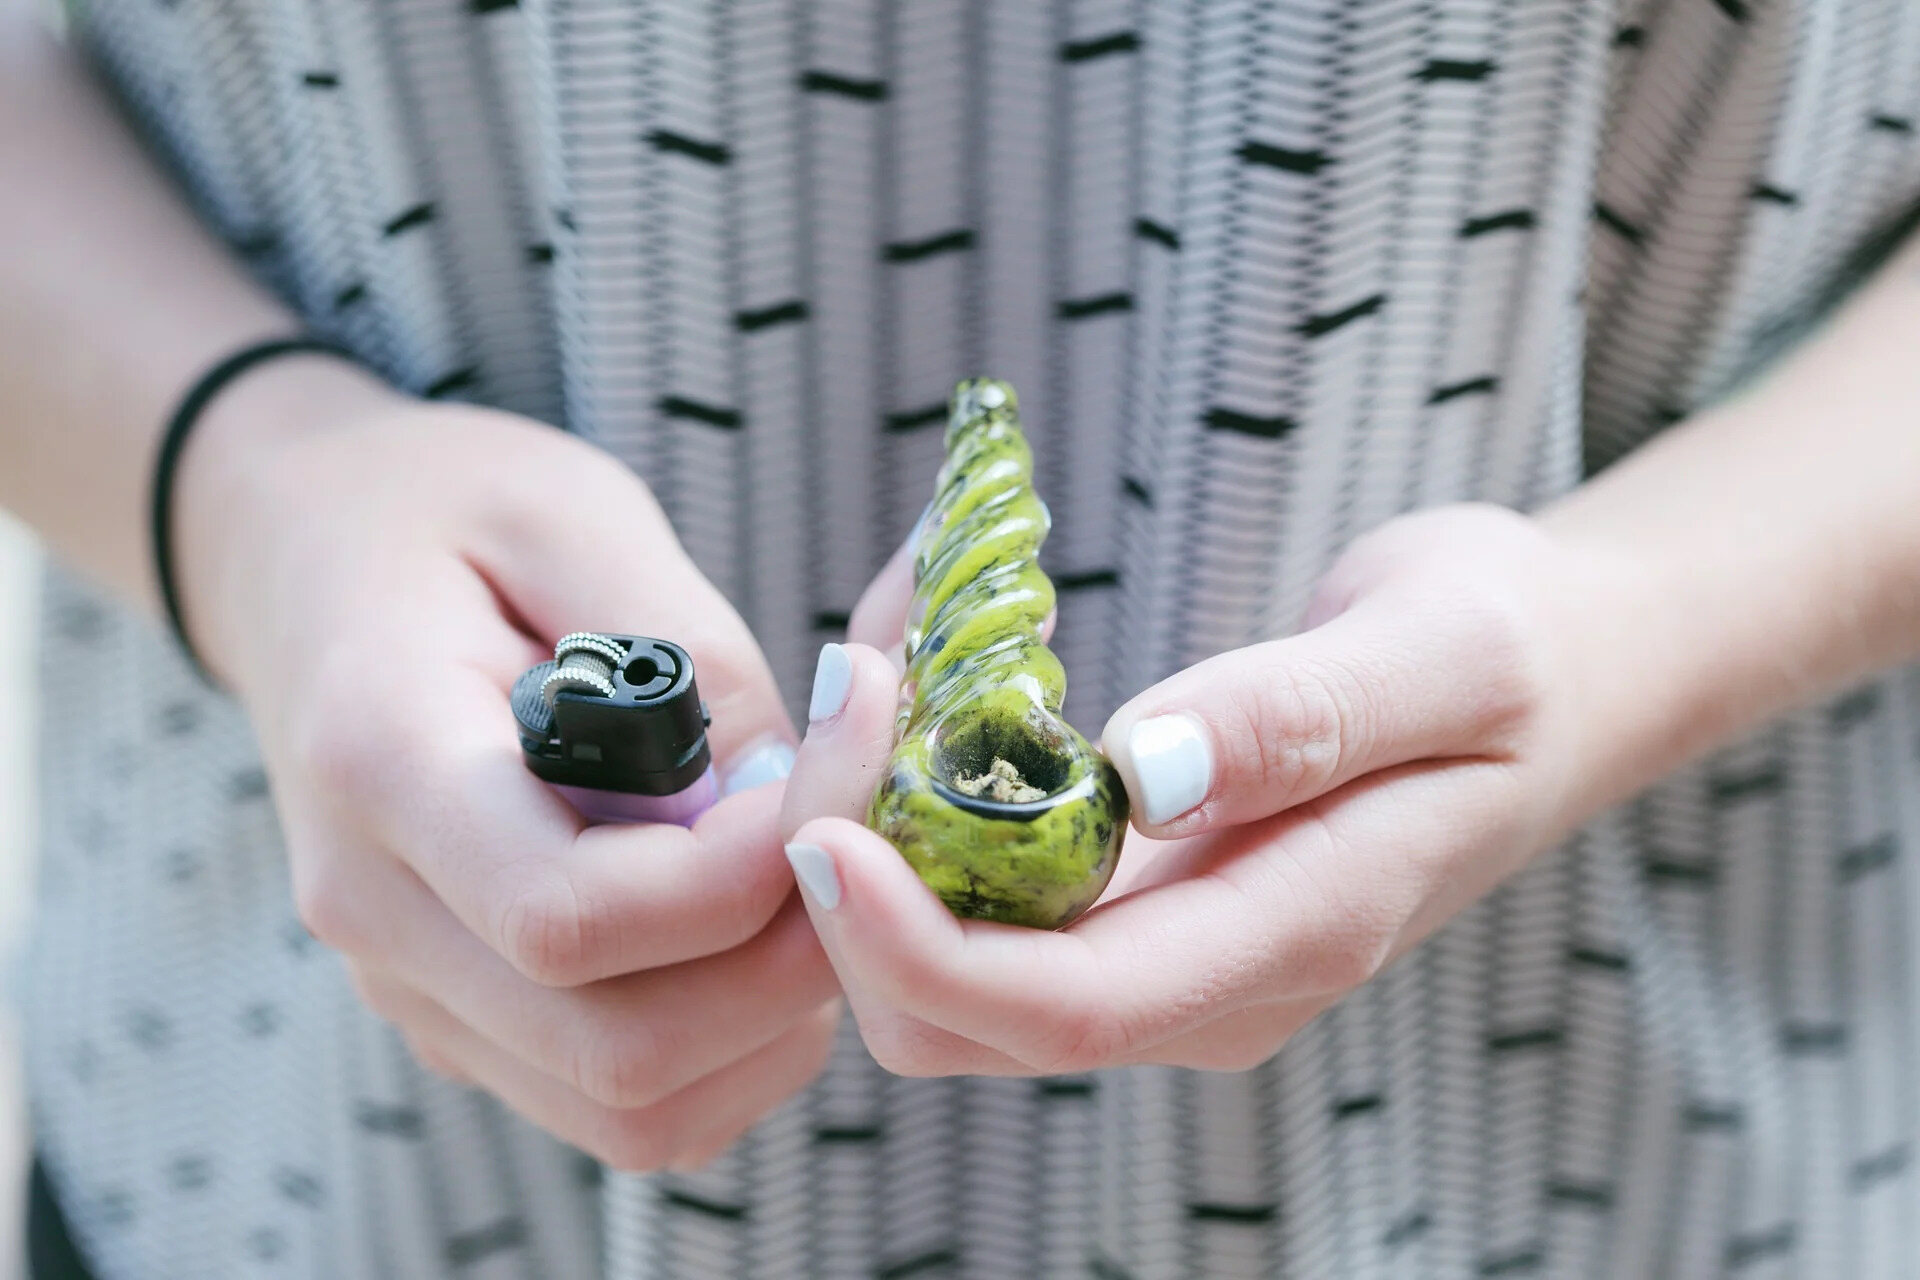 How To Collect Resin From A Glass Pipe